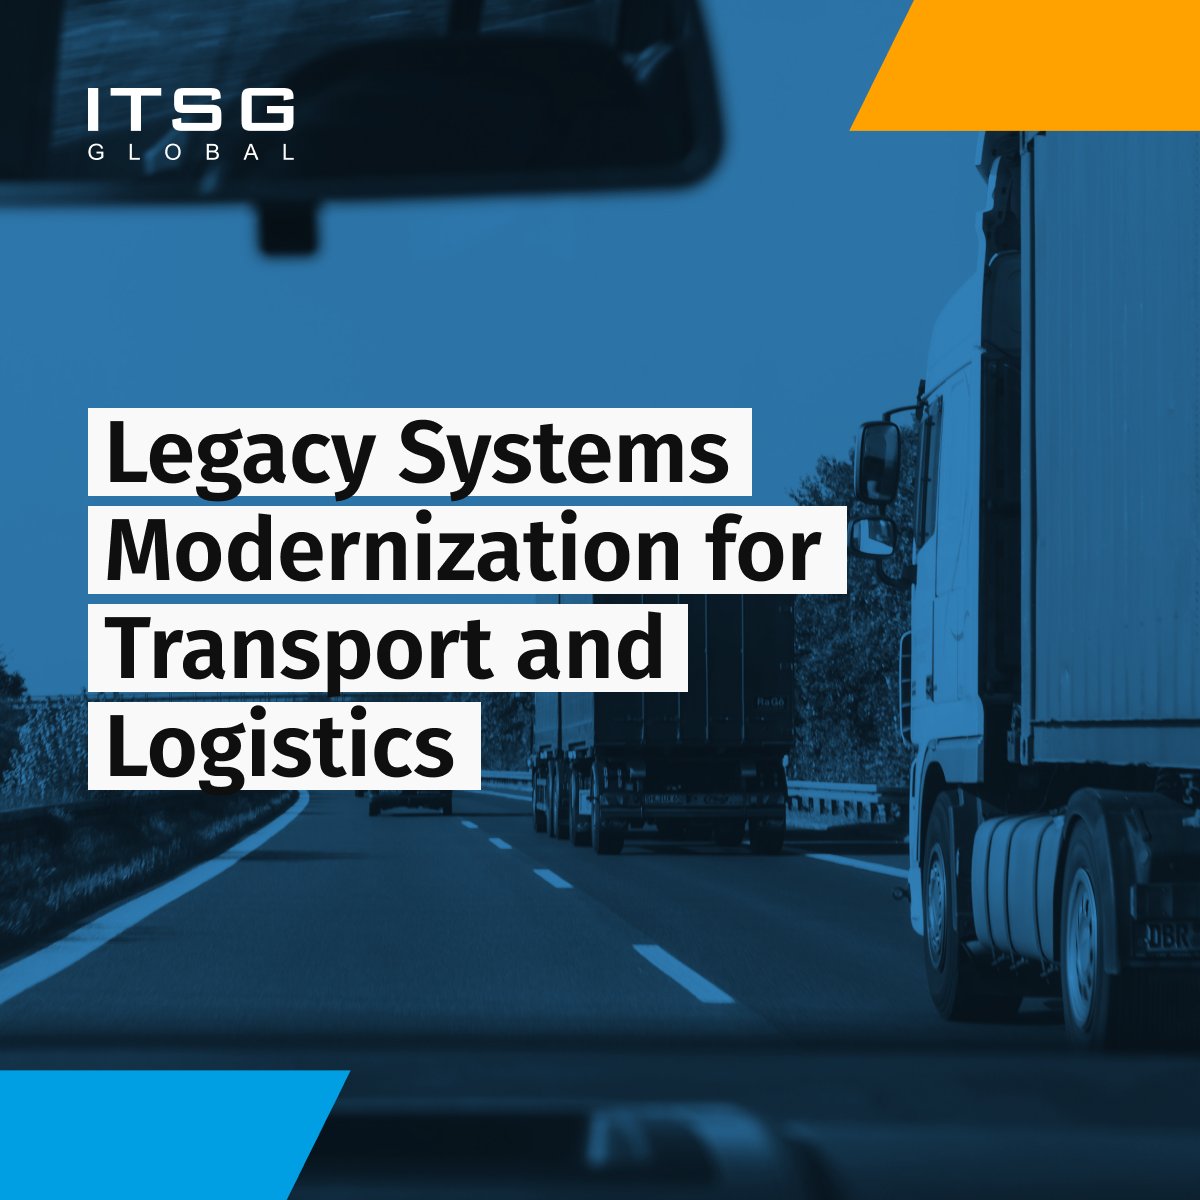 Stay ahead in the transport and logistics industry by upgrading your business with modern architecture. 🚚 Learn more: itsg-global.com/solutions/digi… 👈 #itsg #itsgglobal #legacymodernization #legacy #modernization #softwareengineering #transport #logistics